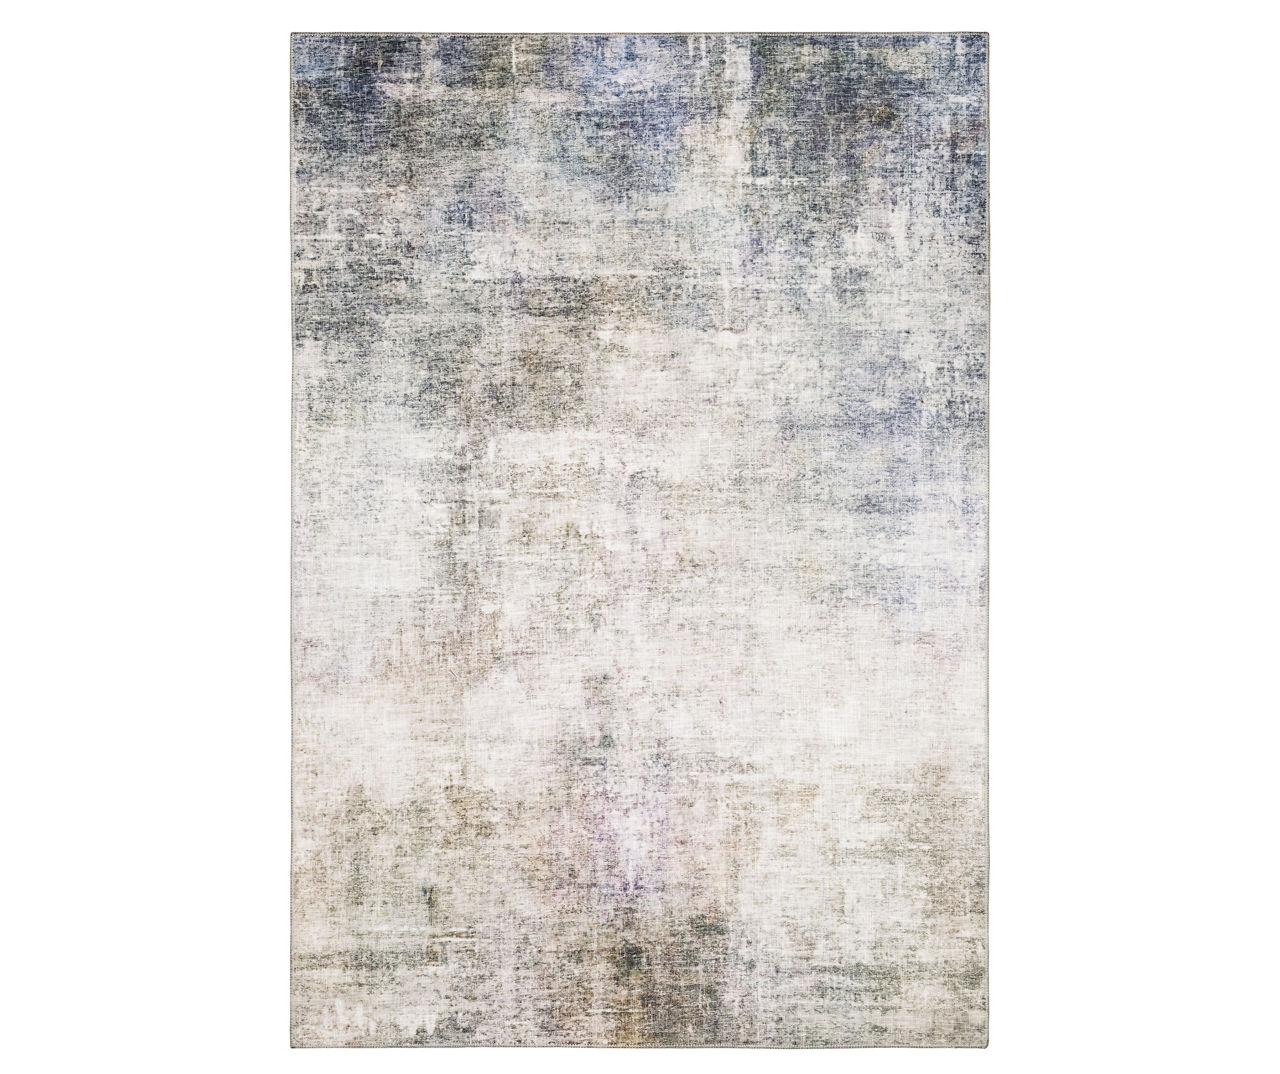 Mykell Beige & Blue Abstract Area Rug, (7.8' x 10')